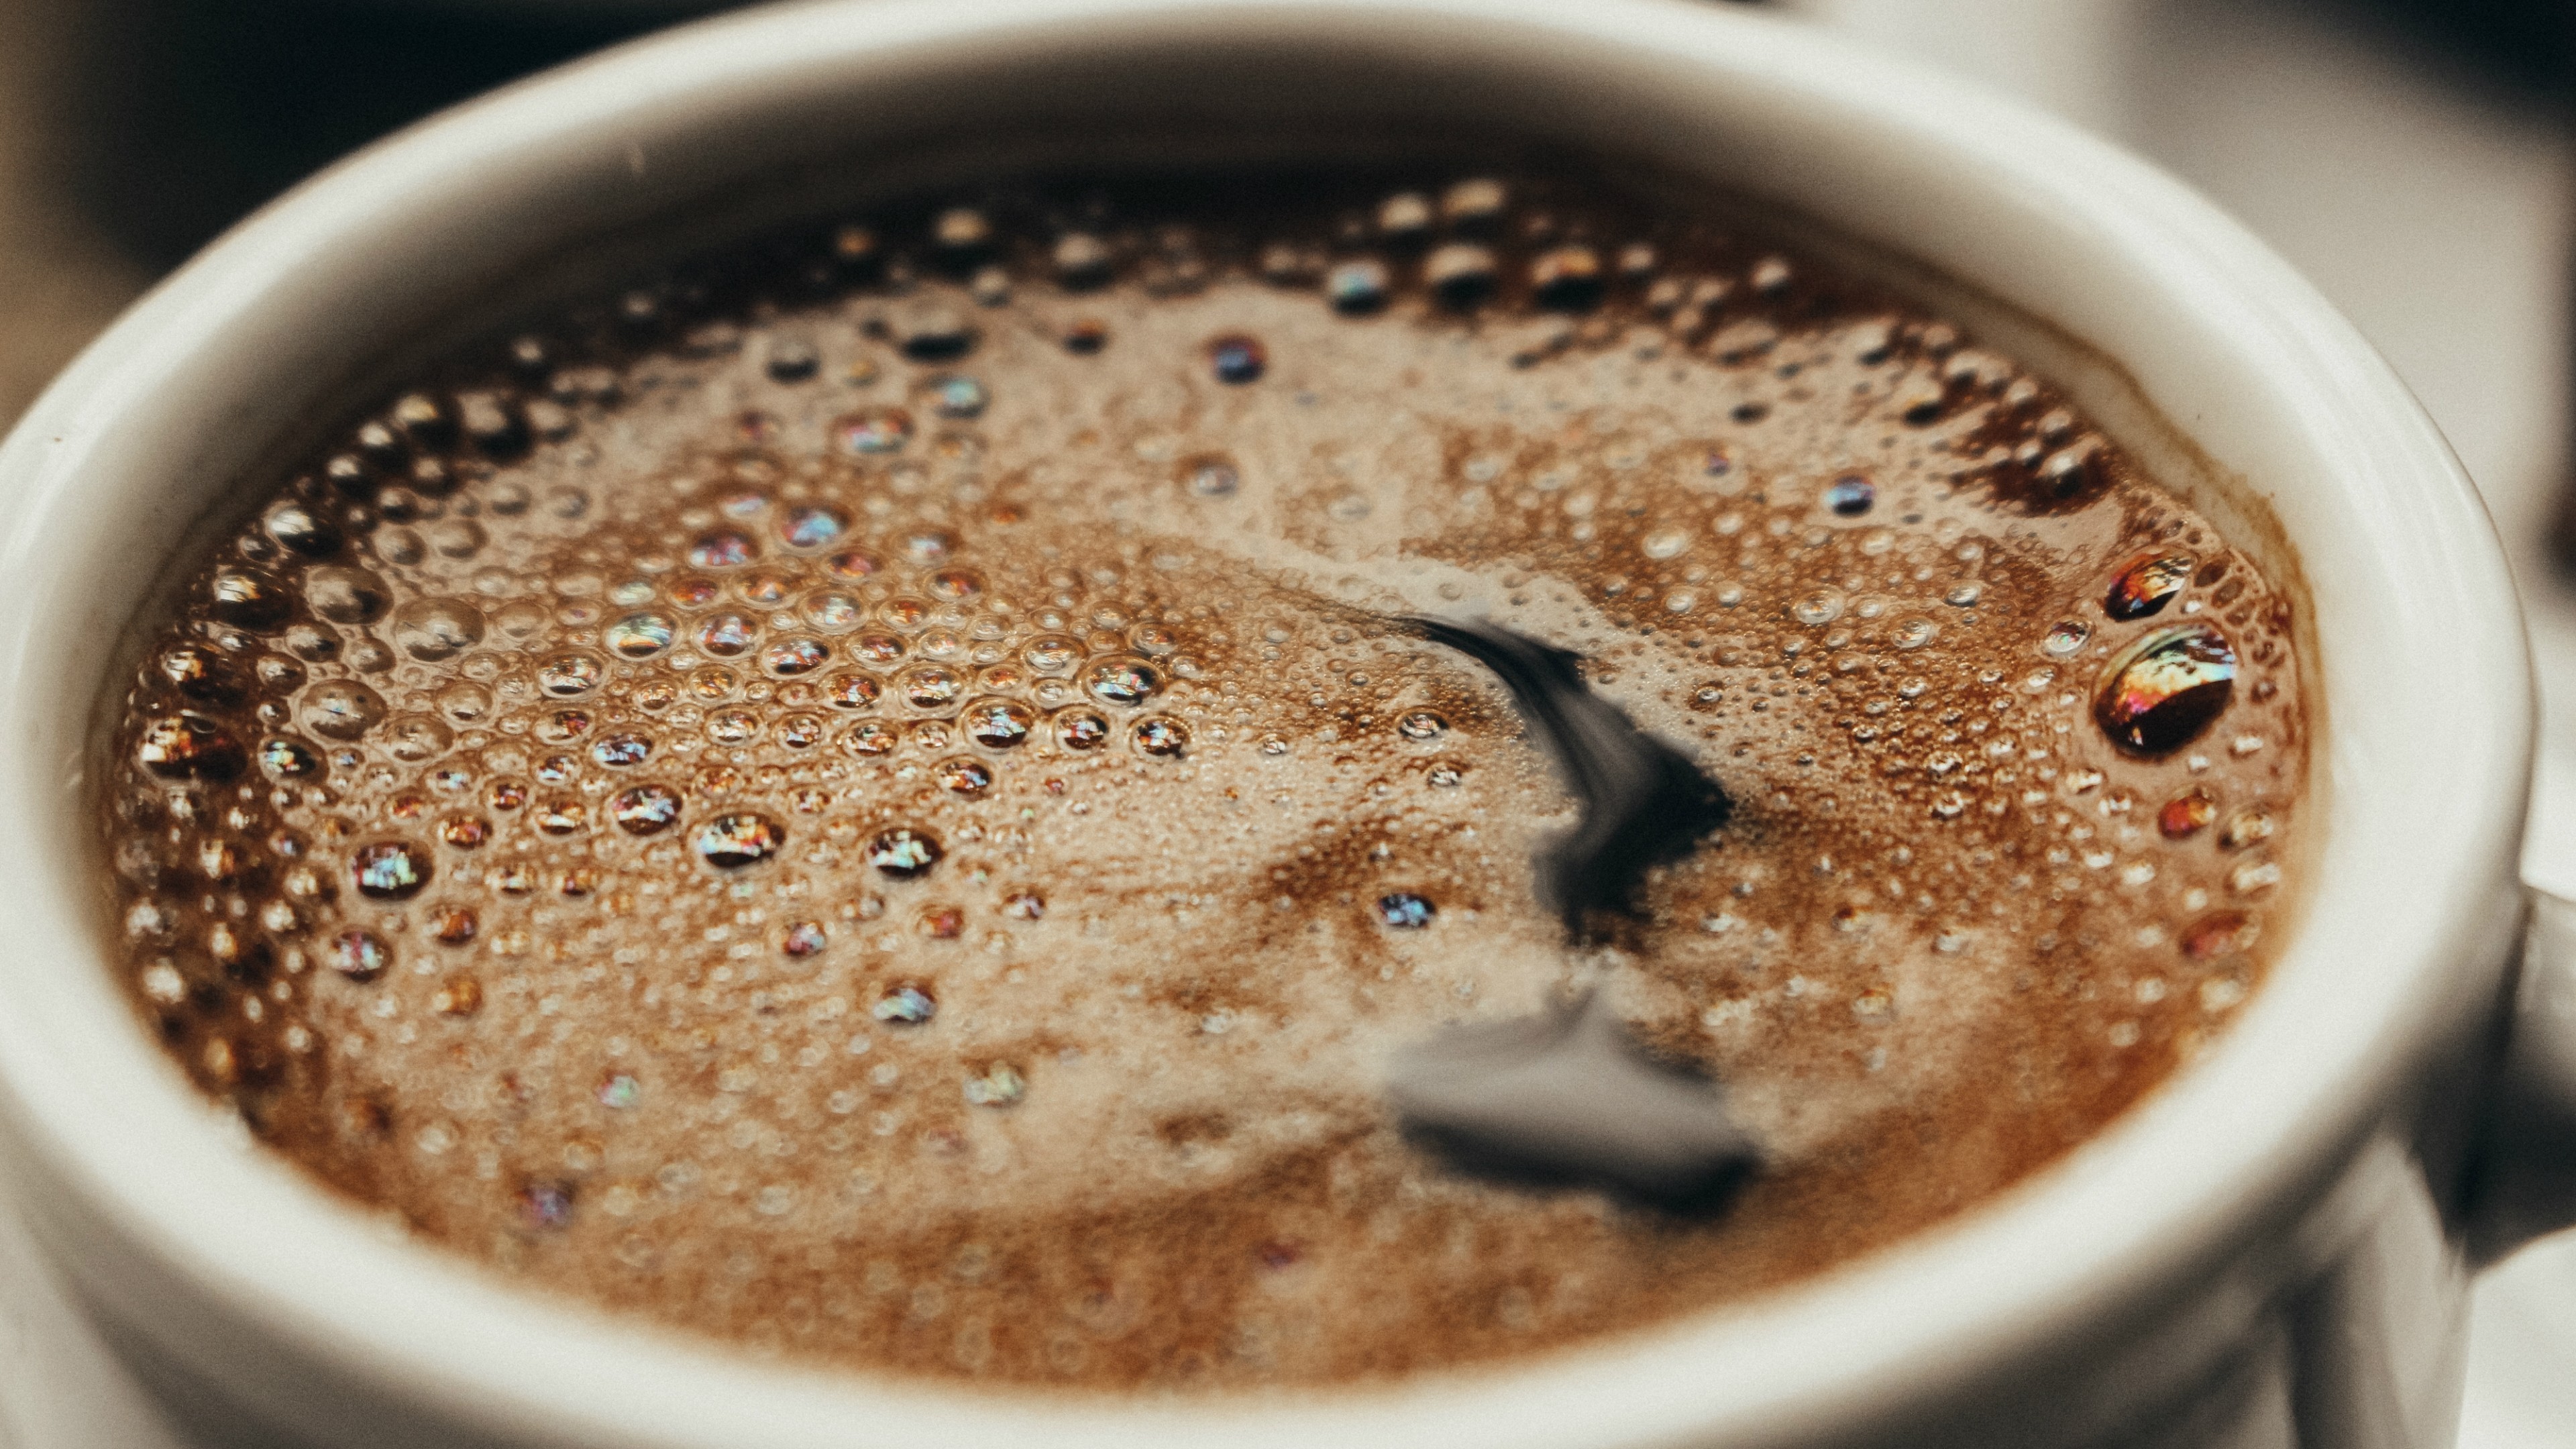 Download 3840x2160 Black Coffee, Close Up, Drinks, Cup